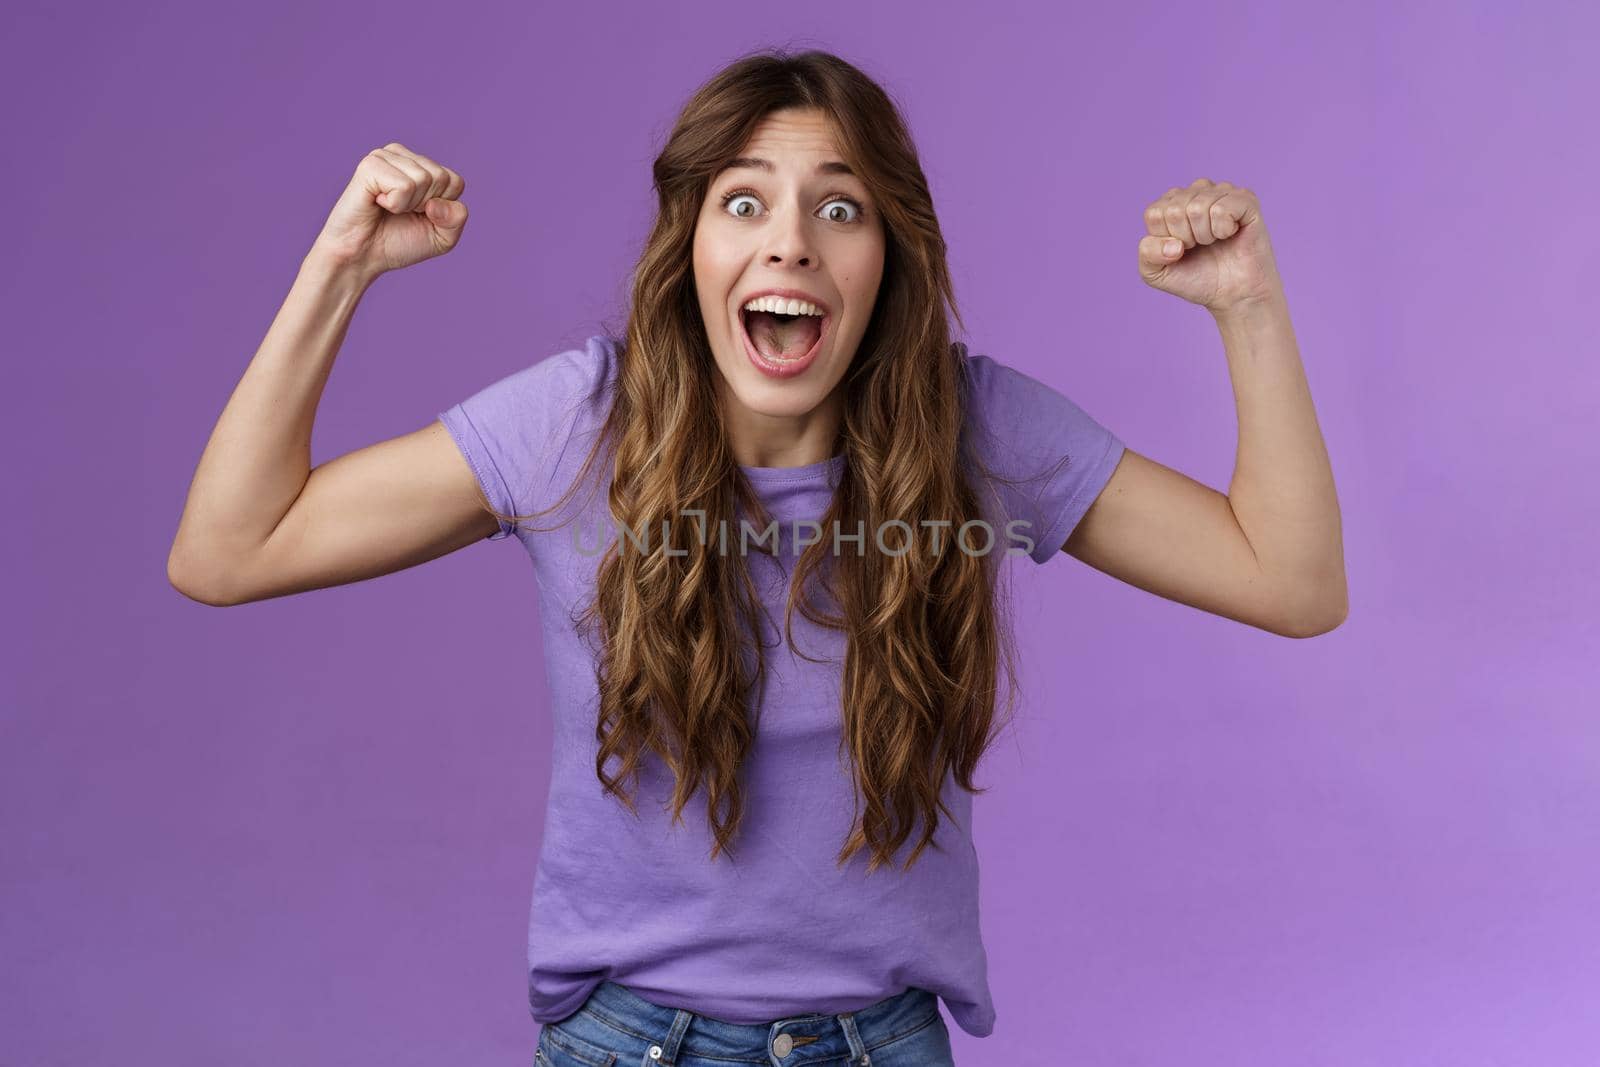 Excited happy cheerful curly-haired girlfriend cheering encourage team win rooting for friend raise hands fist pump celebration yelling enthusiastic, triumphing celebrate victory achievement.